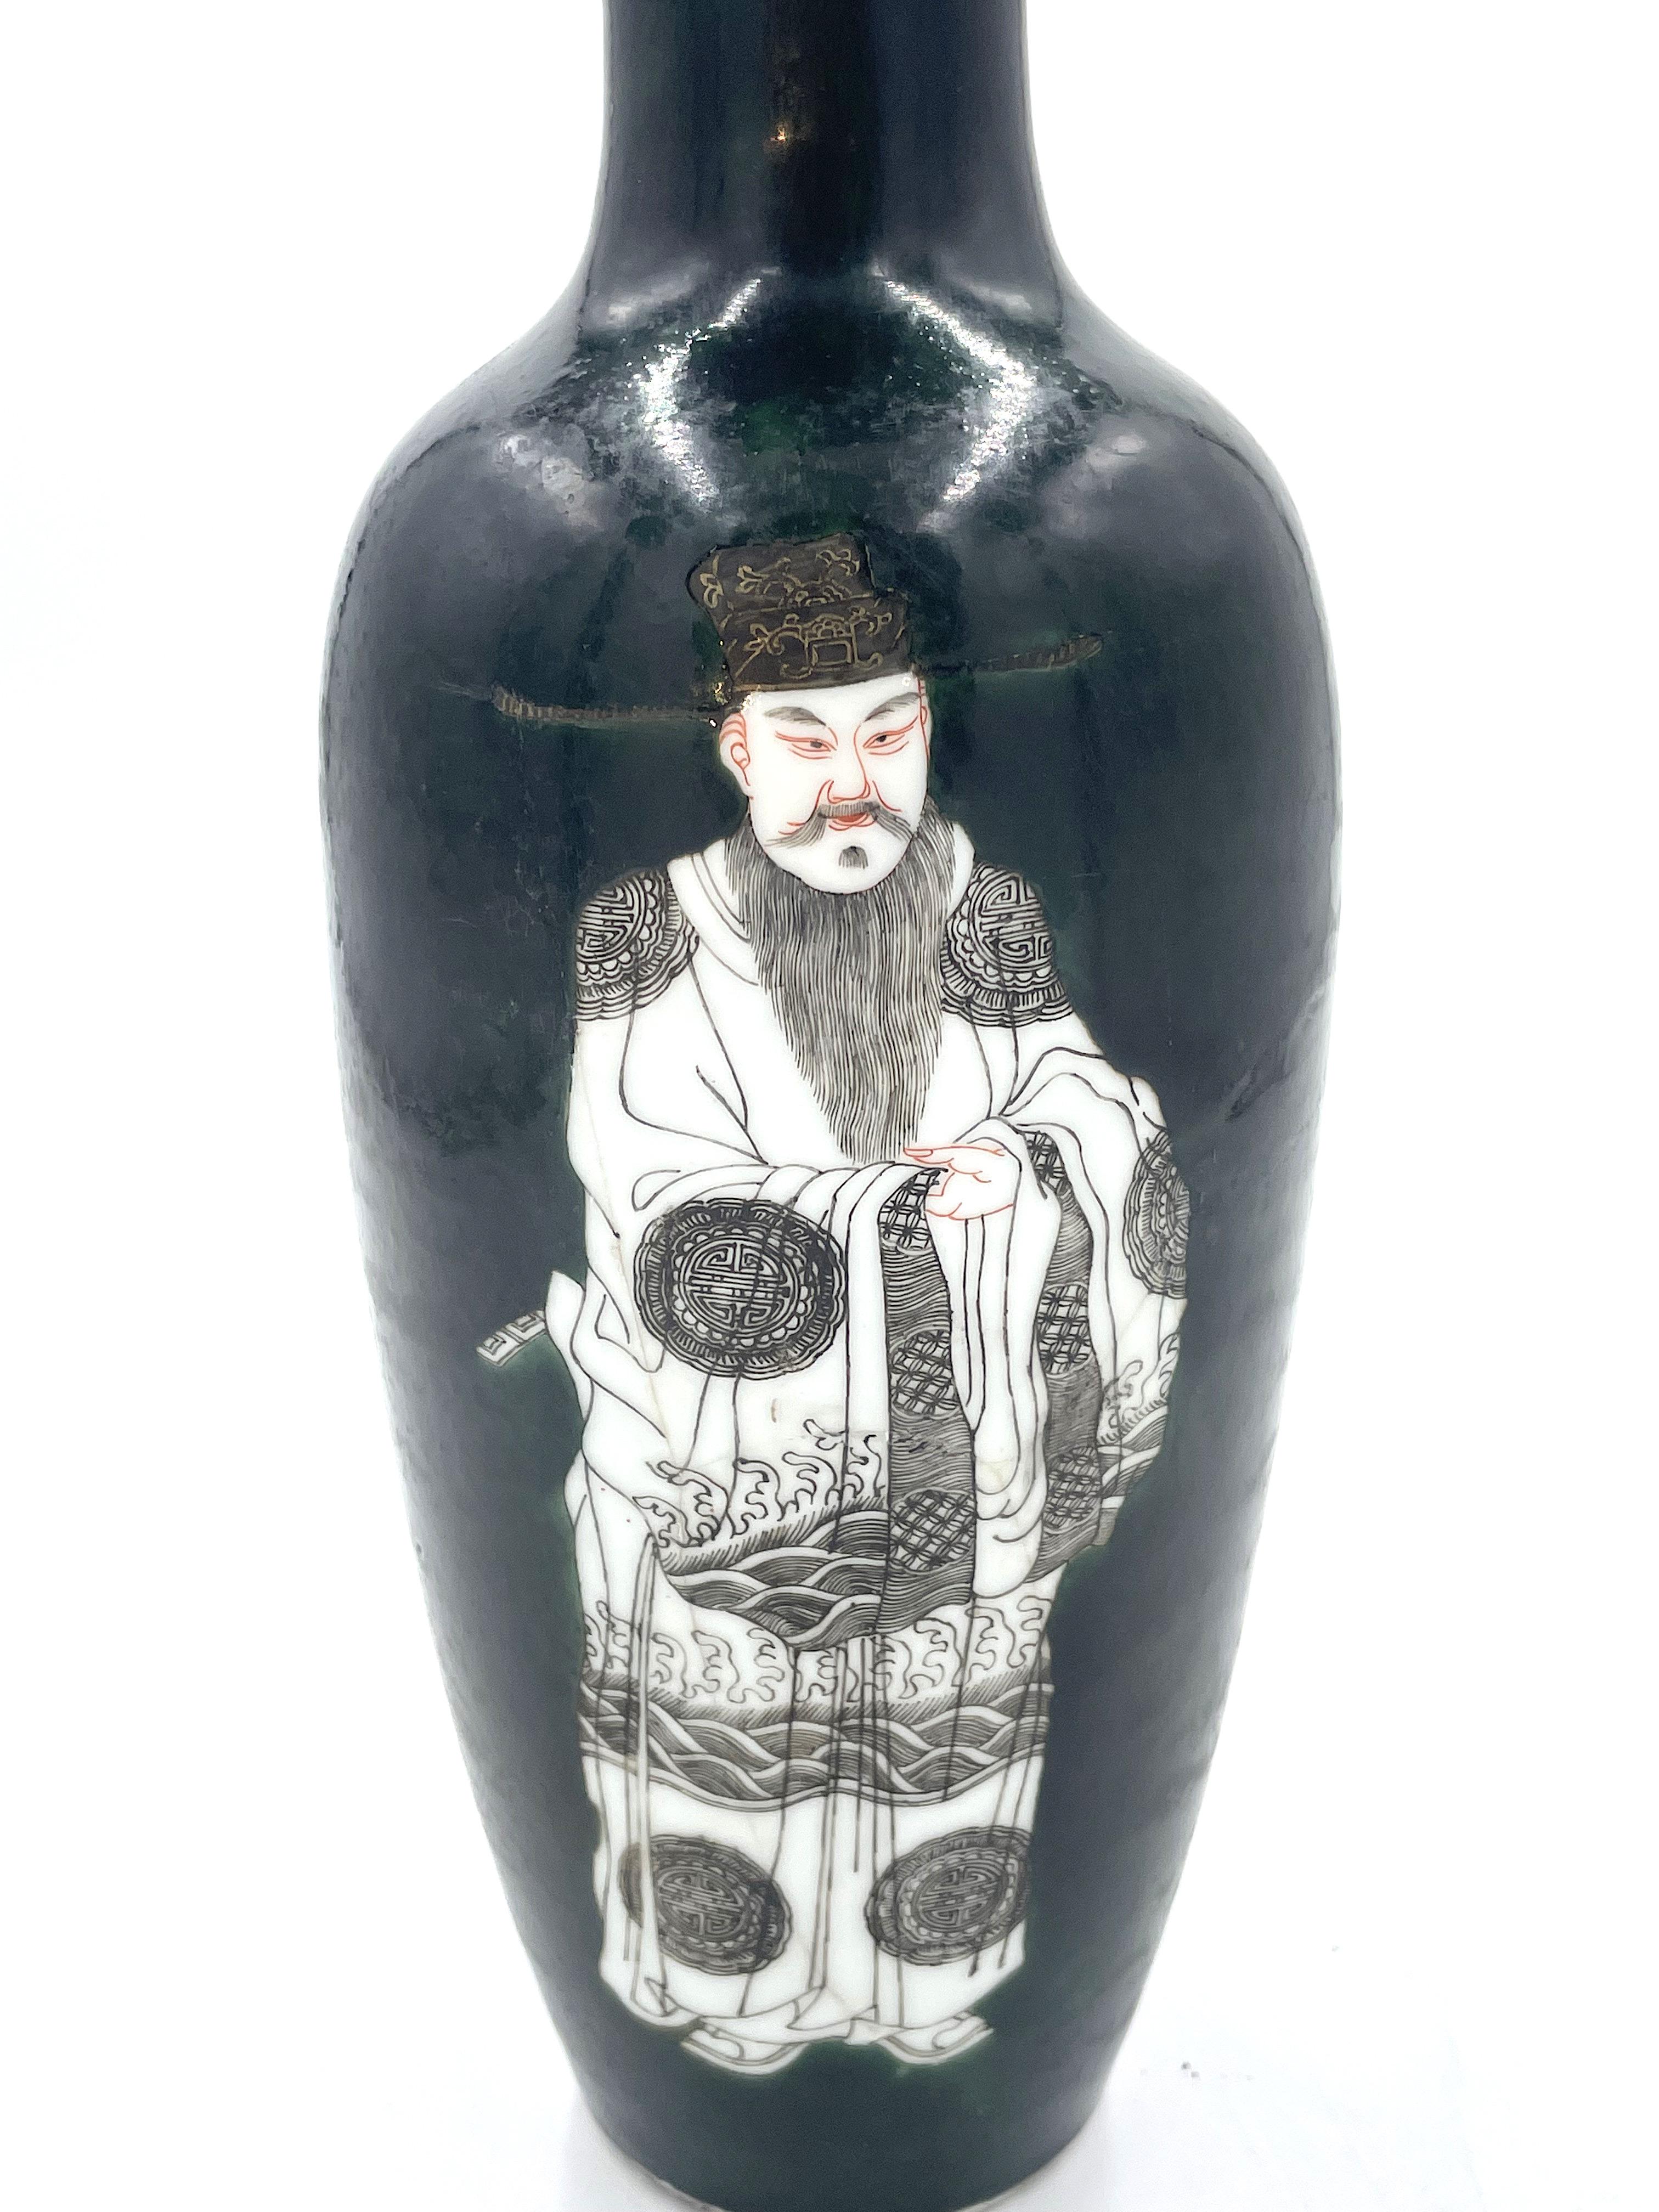 Chinese vase made of glazed/glazed porcelain. There are etchings made by acid etching, with figure reserve decorated and colored in ink, on a copper glaze ground.

At the bottom are Chinese characters that highlight the periodization of the vase